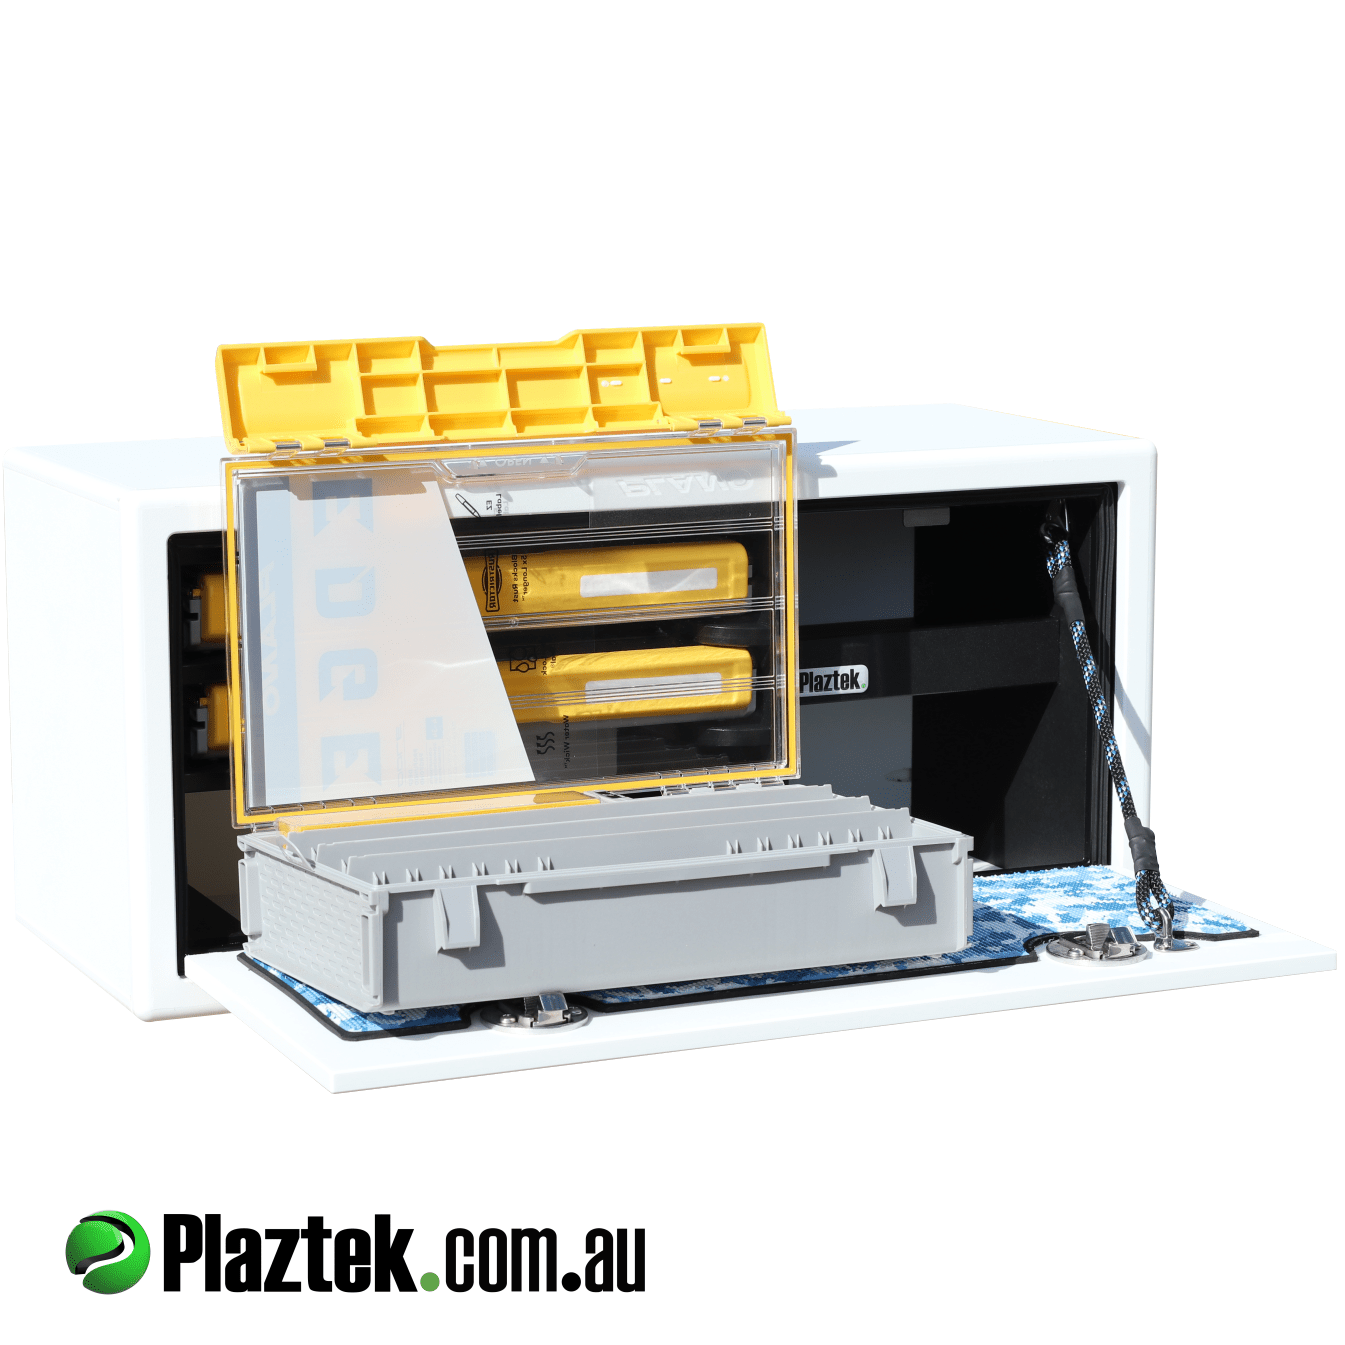 Stand alone fishing tackle cabinet for your boat, holds Plano fishing tackle trays 1x deep and 2x std in 3700 series, Australian made product from king Starboard material